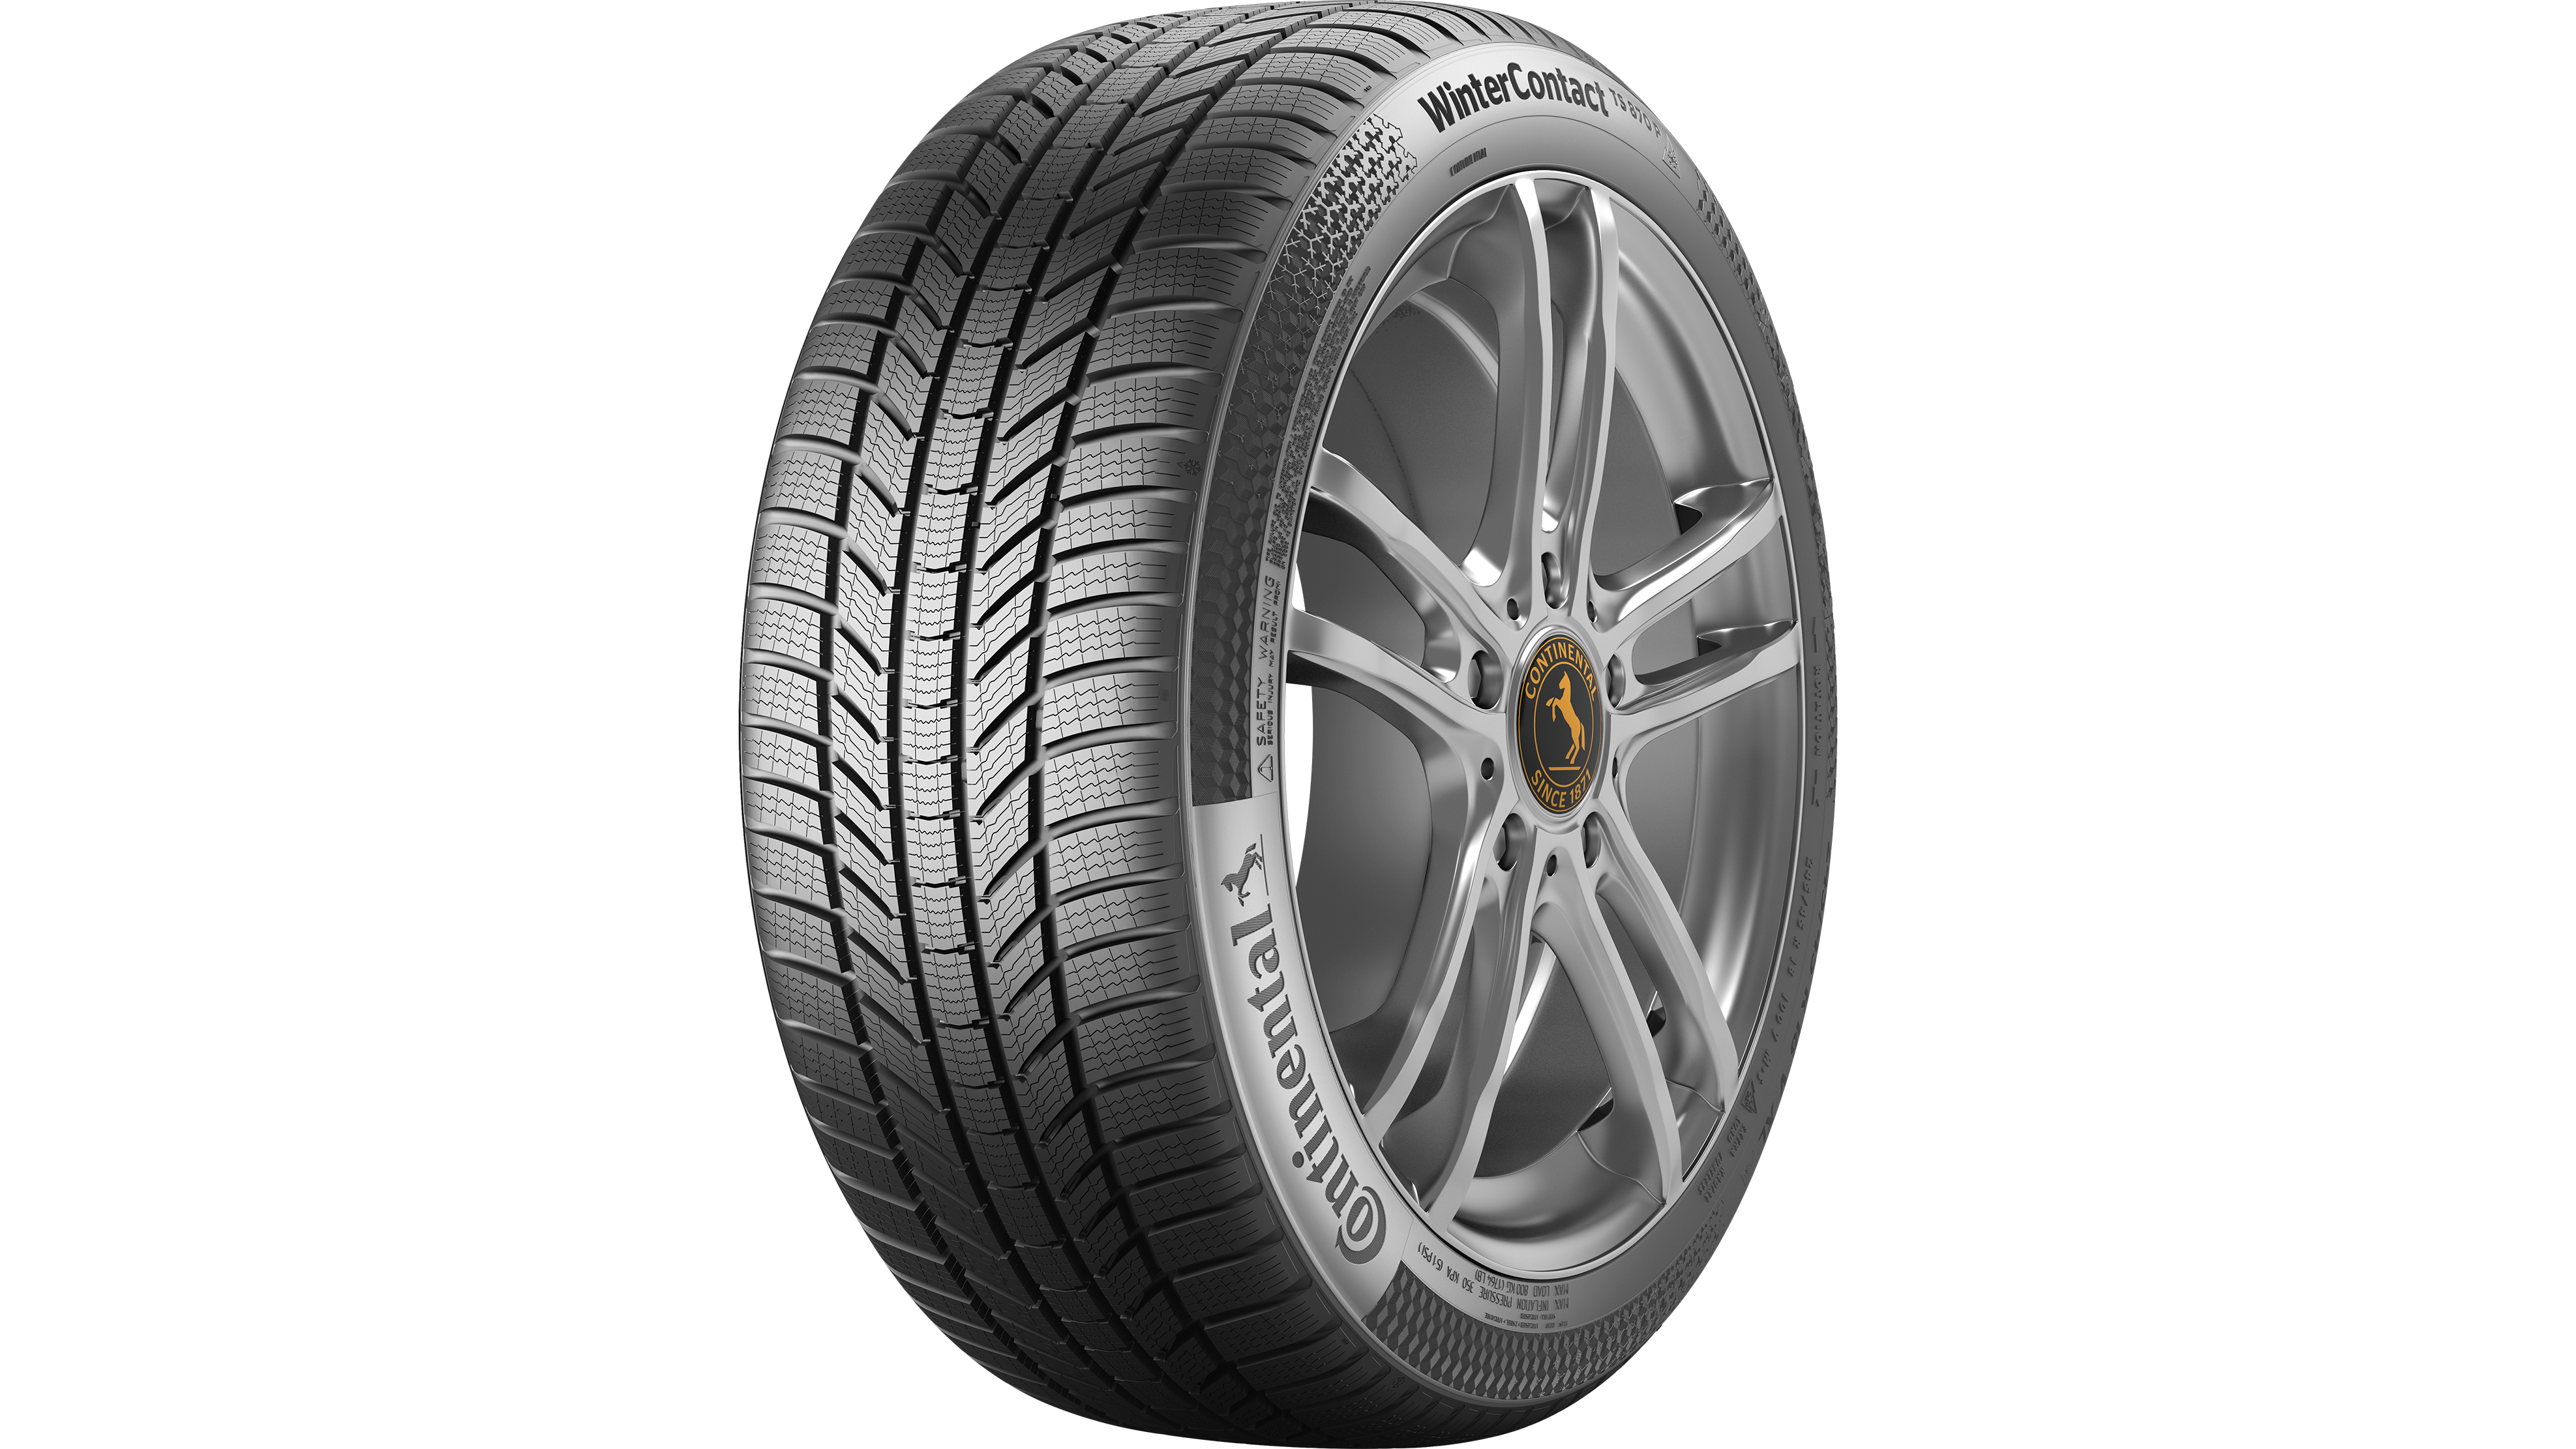 Continental with Top Rating in ADAC 2023 Winter Tire Test - Continental AG